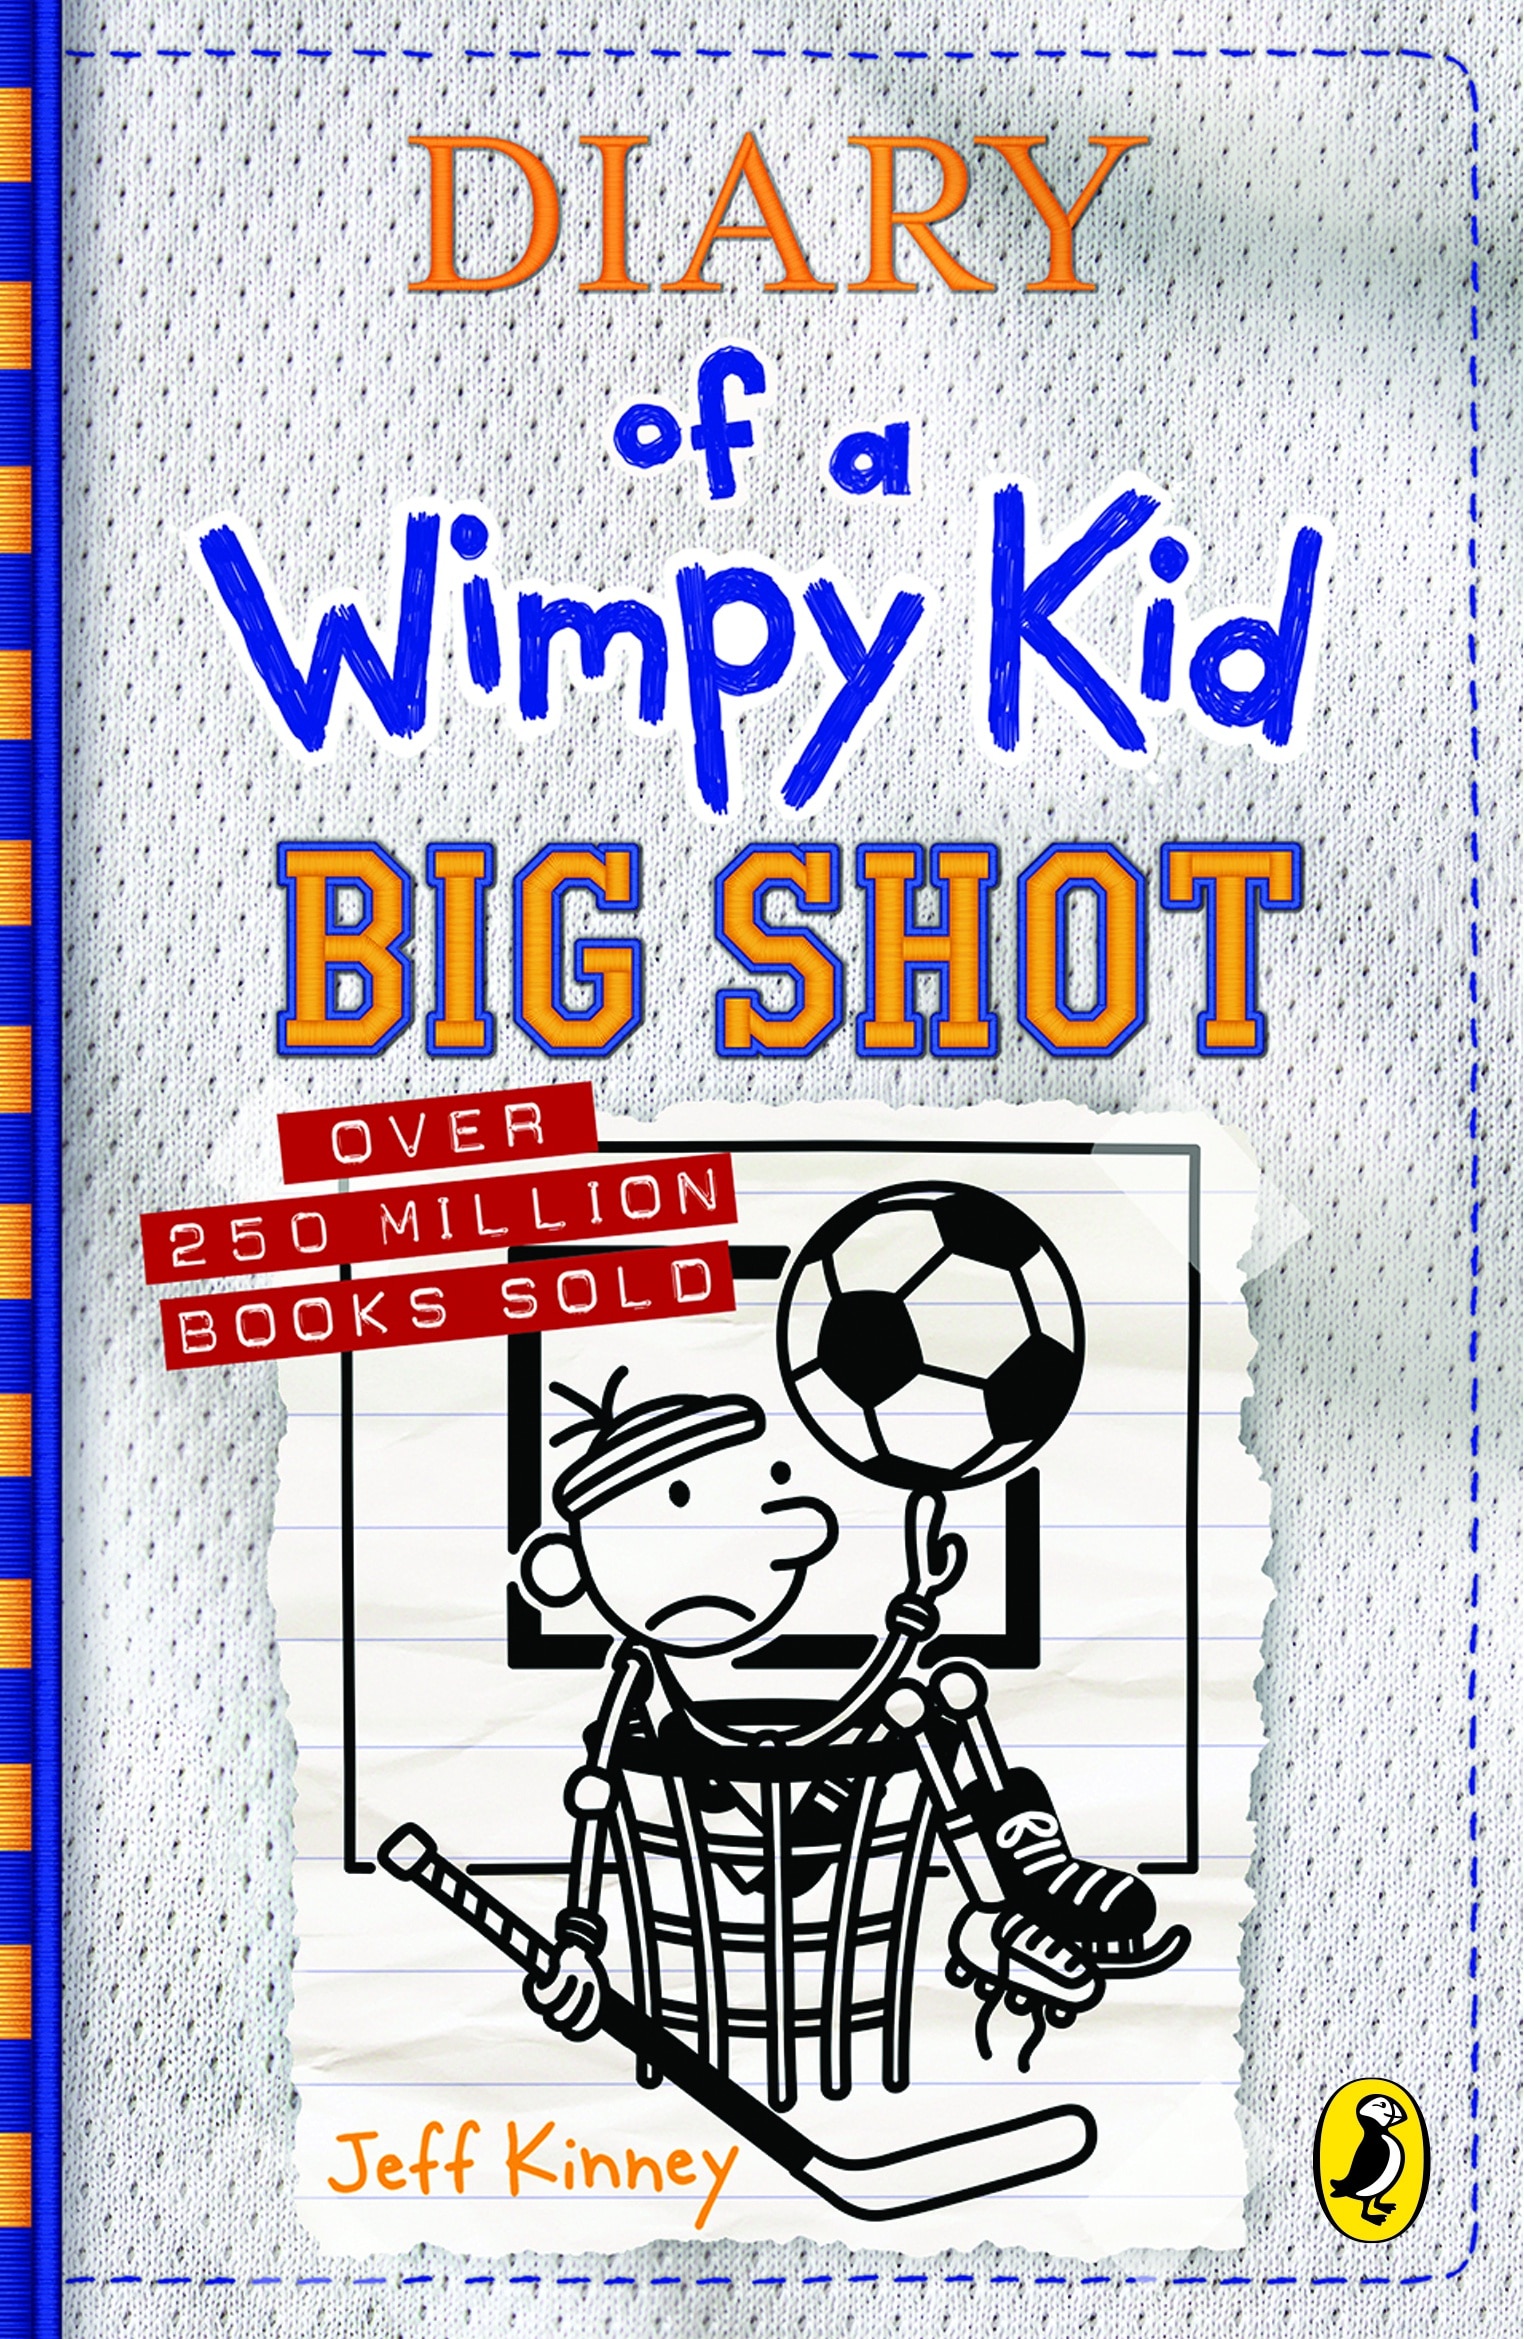 Hot Mess (Diary of a Wimpy Kid Book 19) See more